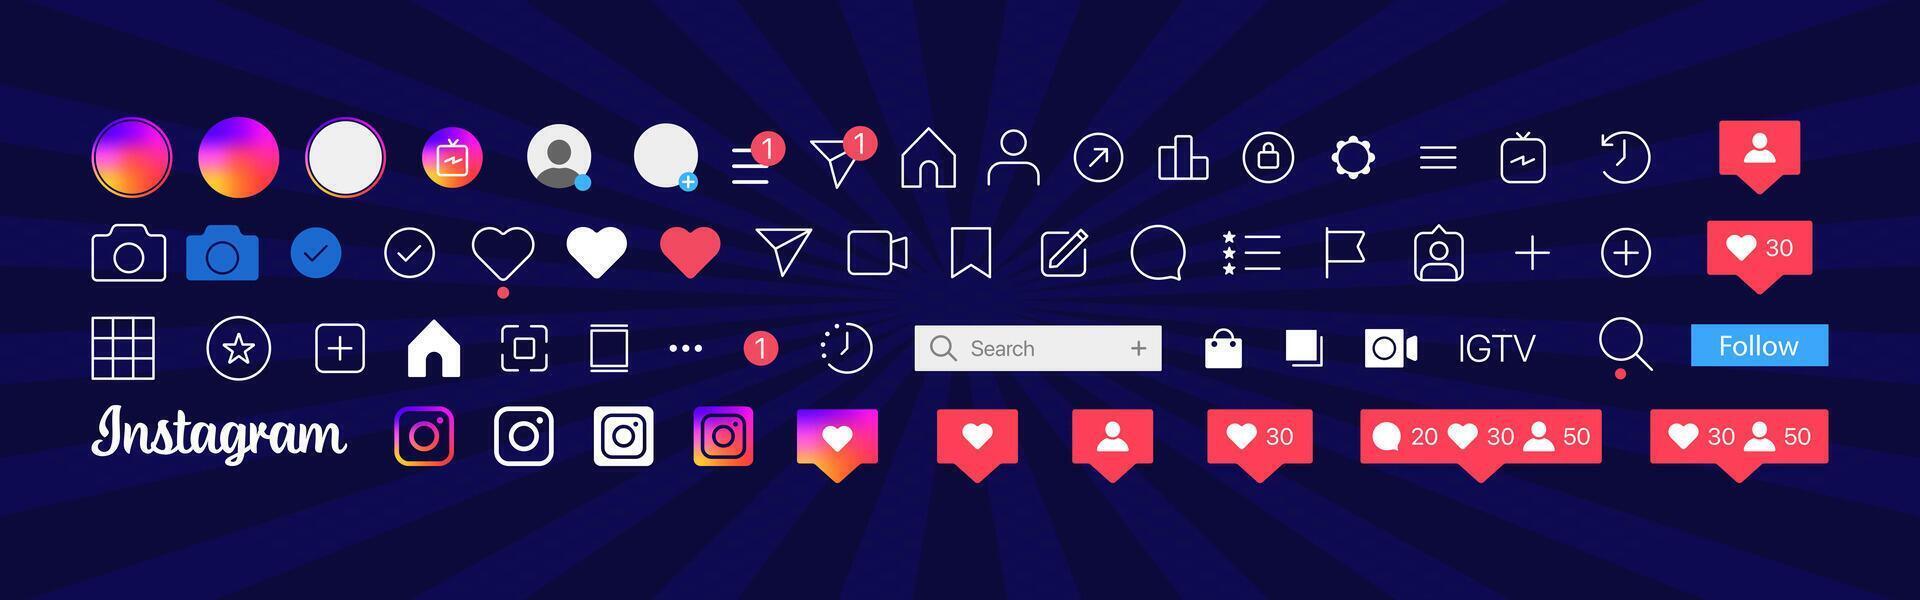 Instagram button icon. Set instagram screen social media and social network interface template. Stories user button, symbol, sign logo. Stories, liked, stream. Editorial vector illustration